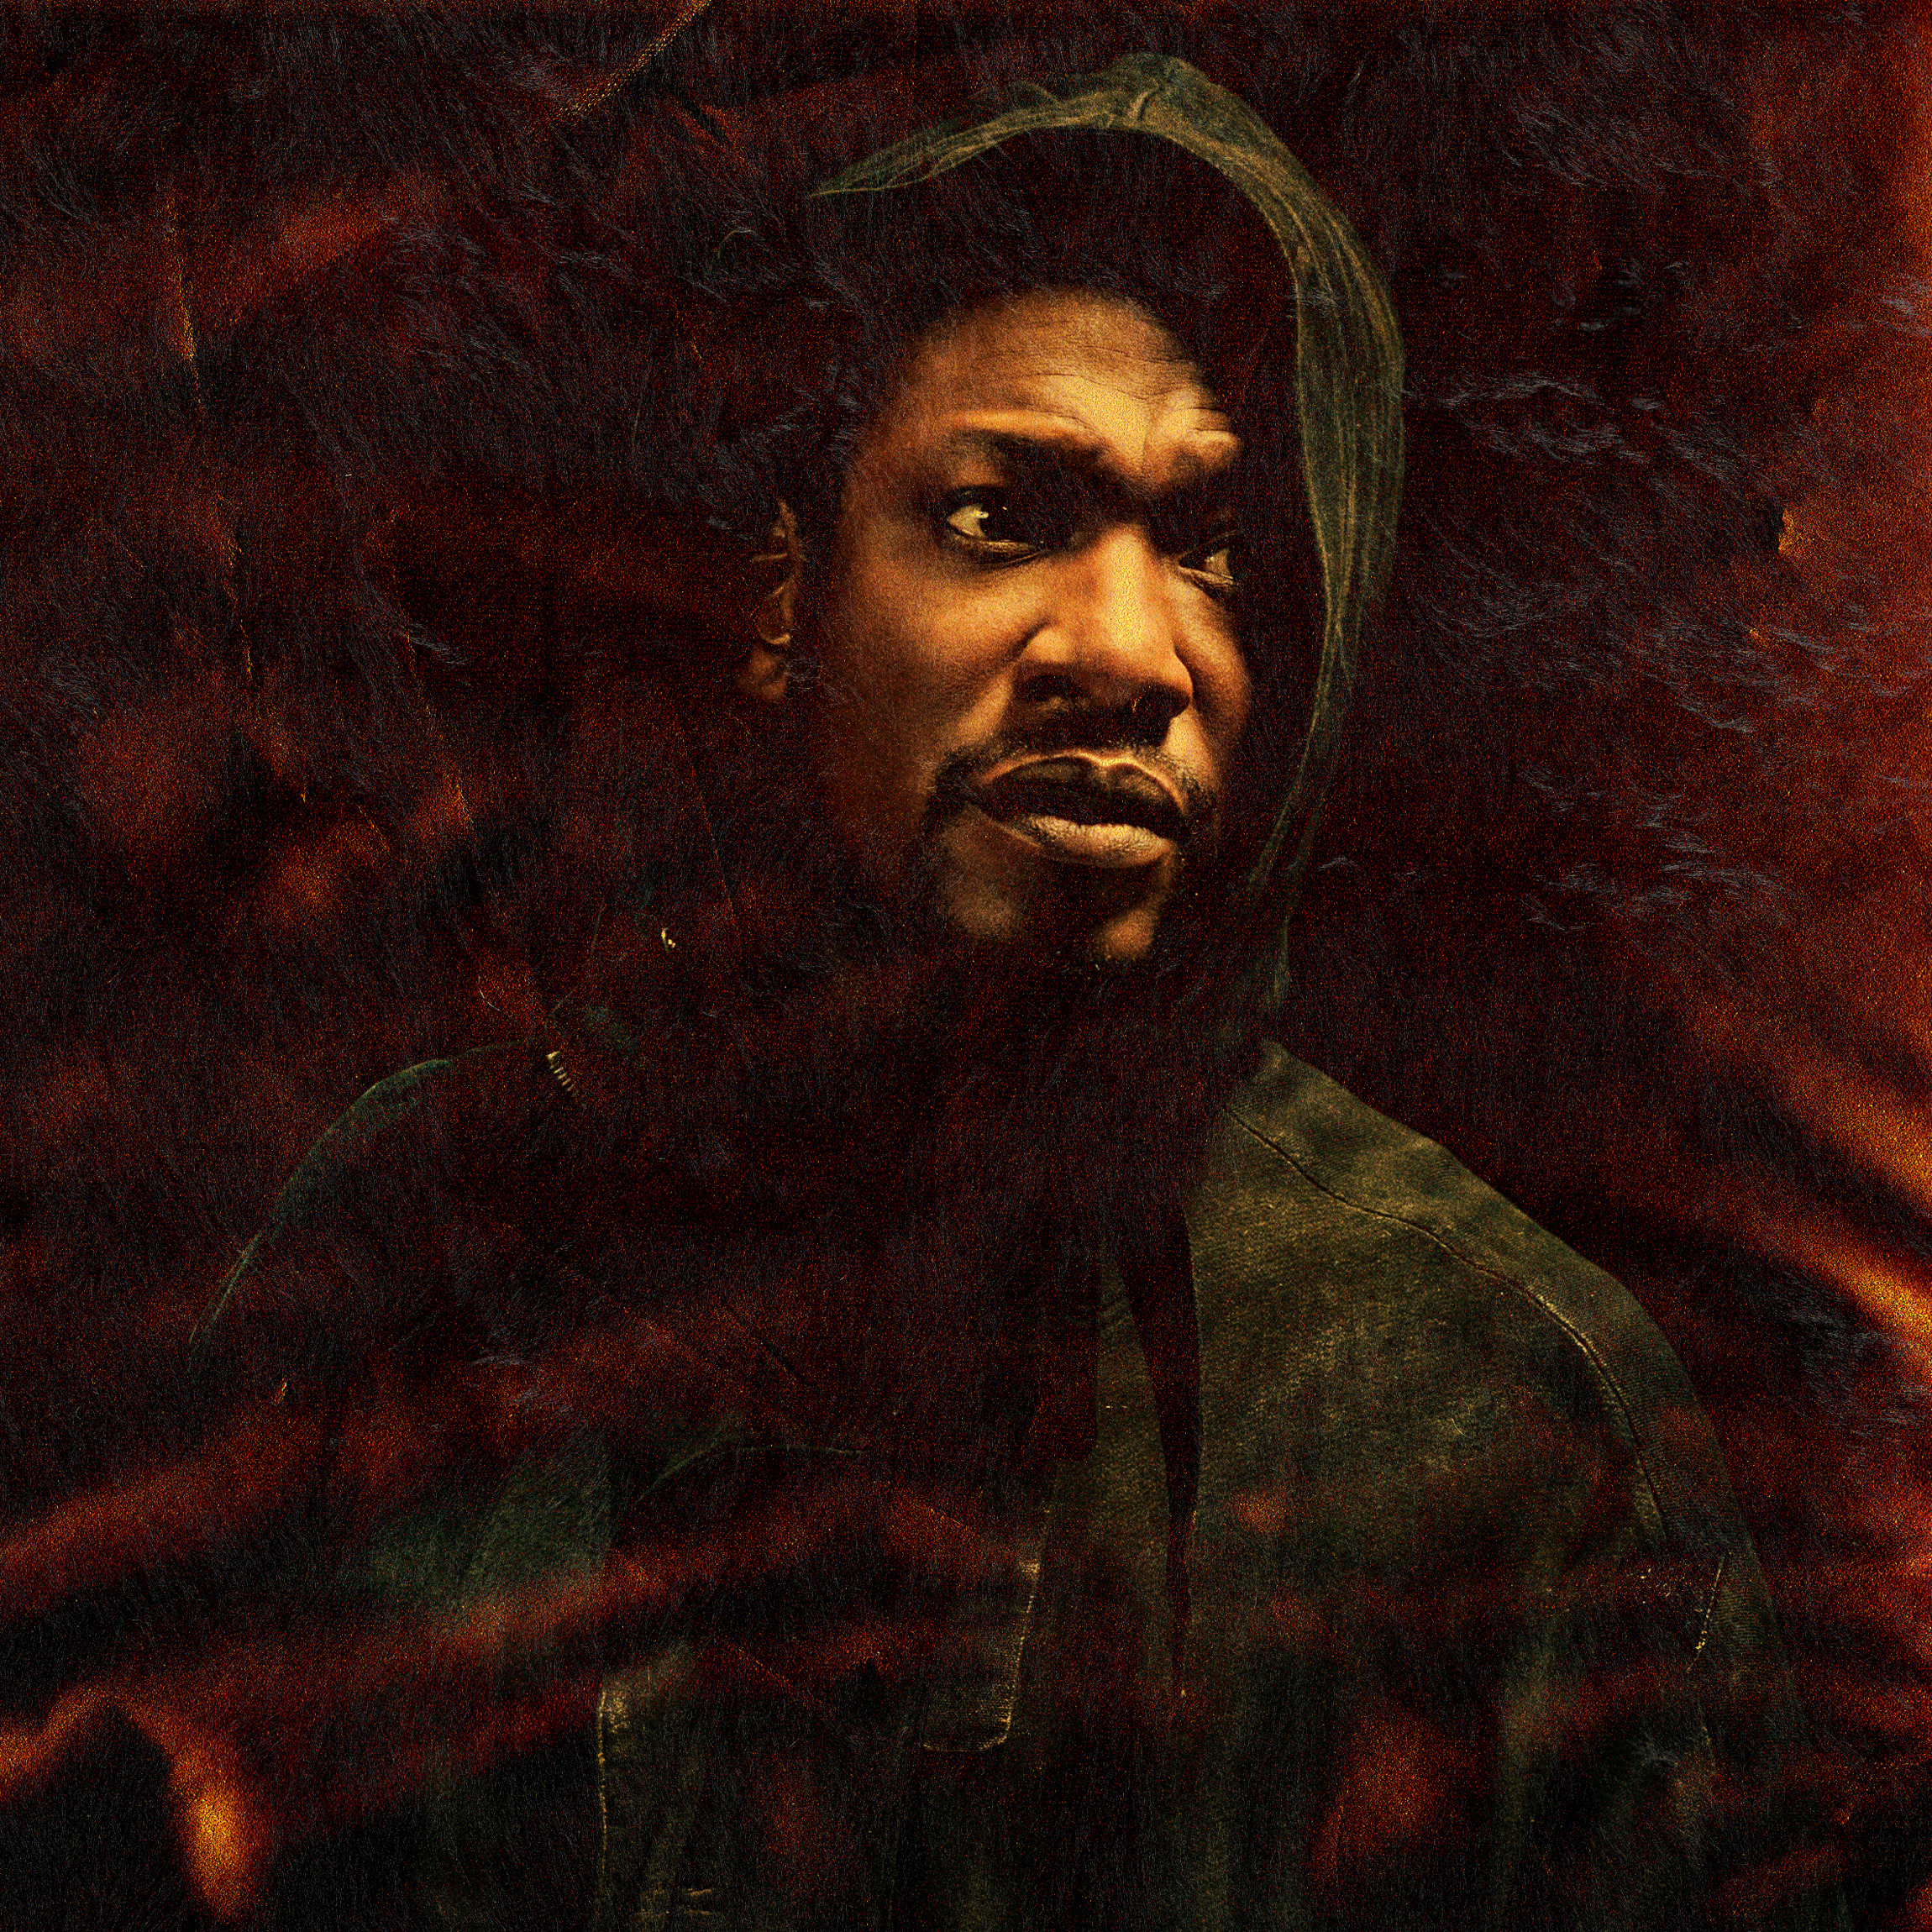 Roots Manuva Run Come Save Me Zip